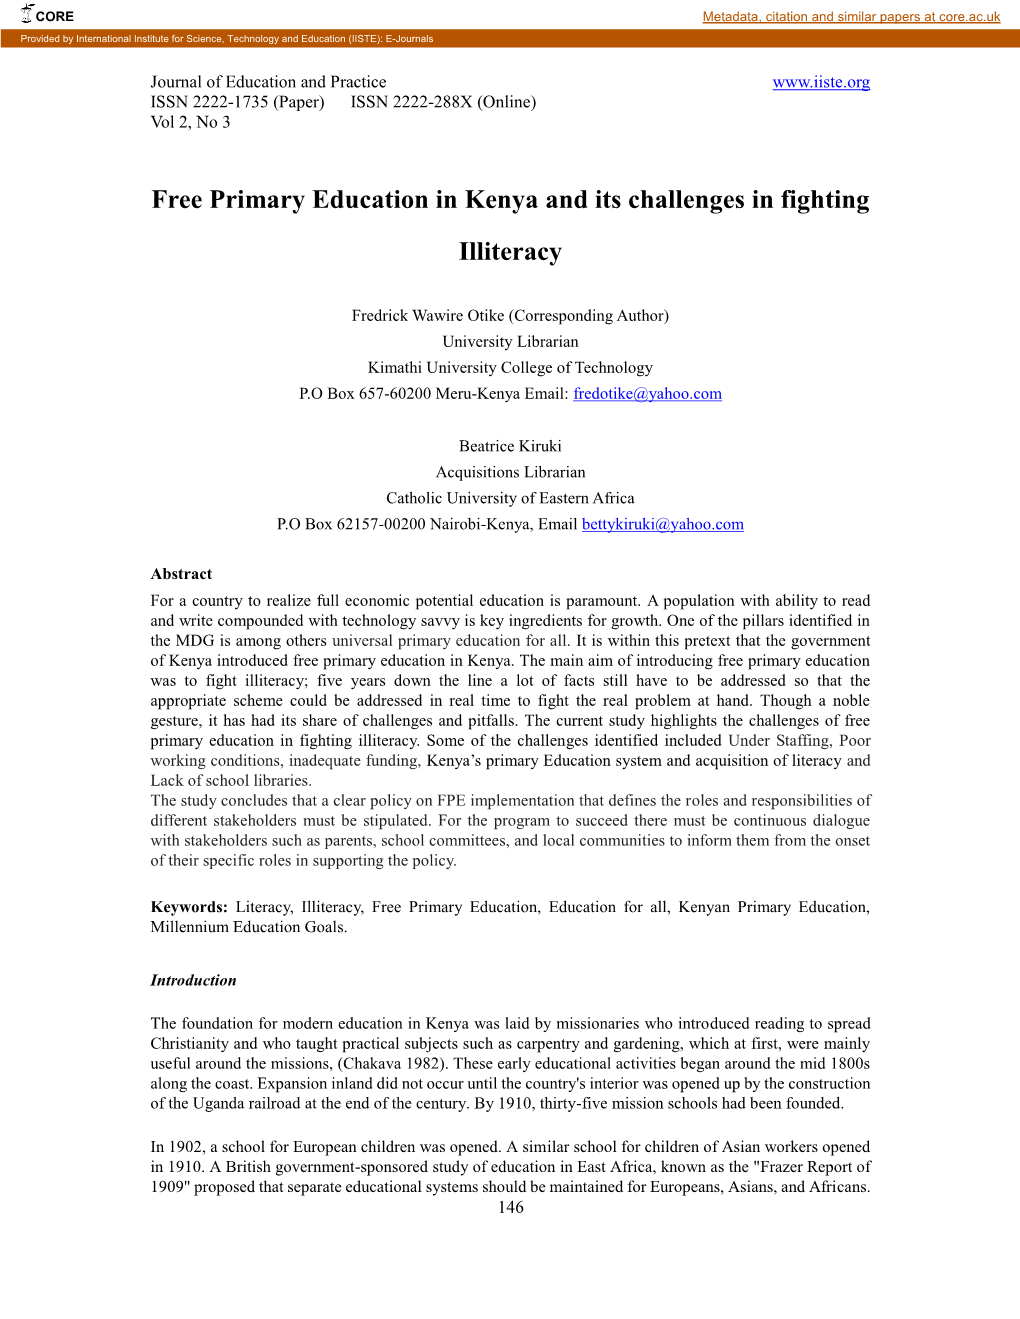 Free Primary Education in Kenya and Its Challenges in Fighting Illiteracy